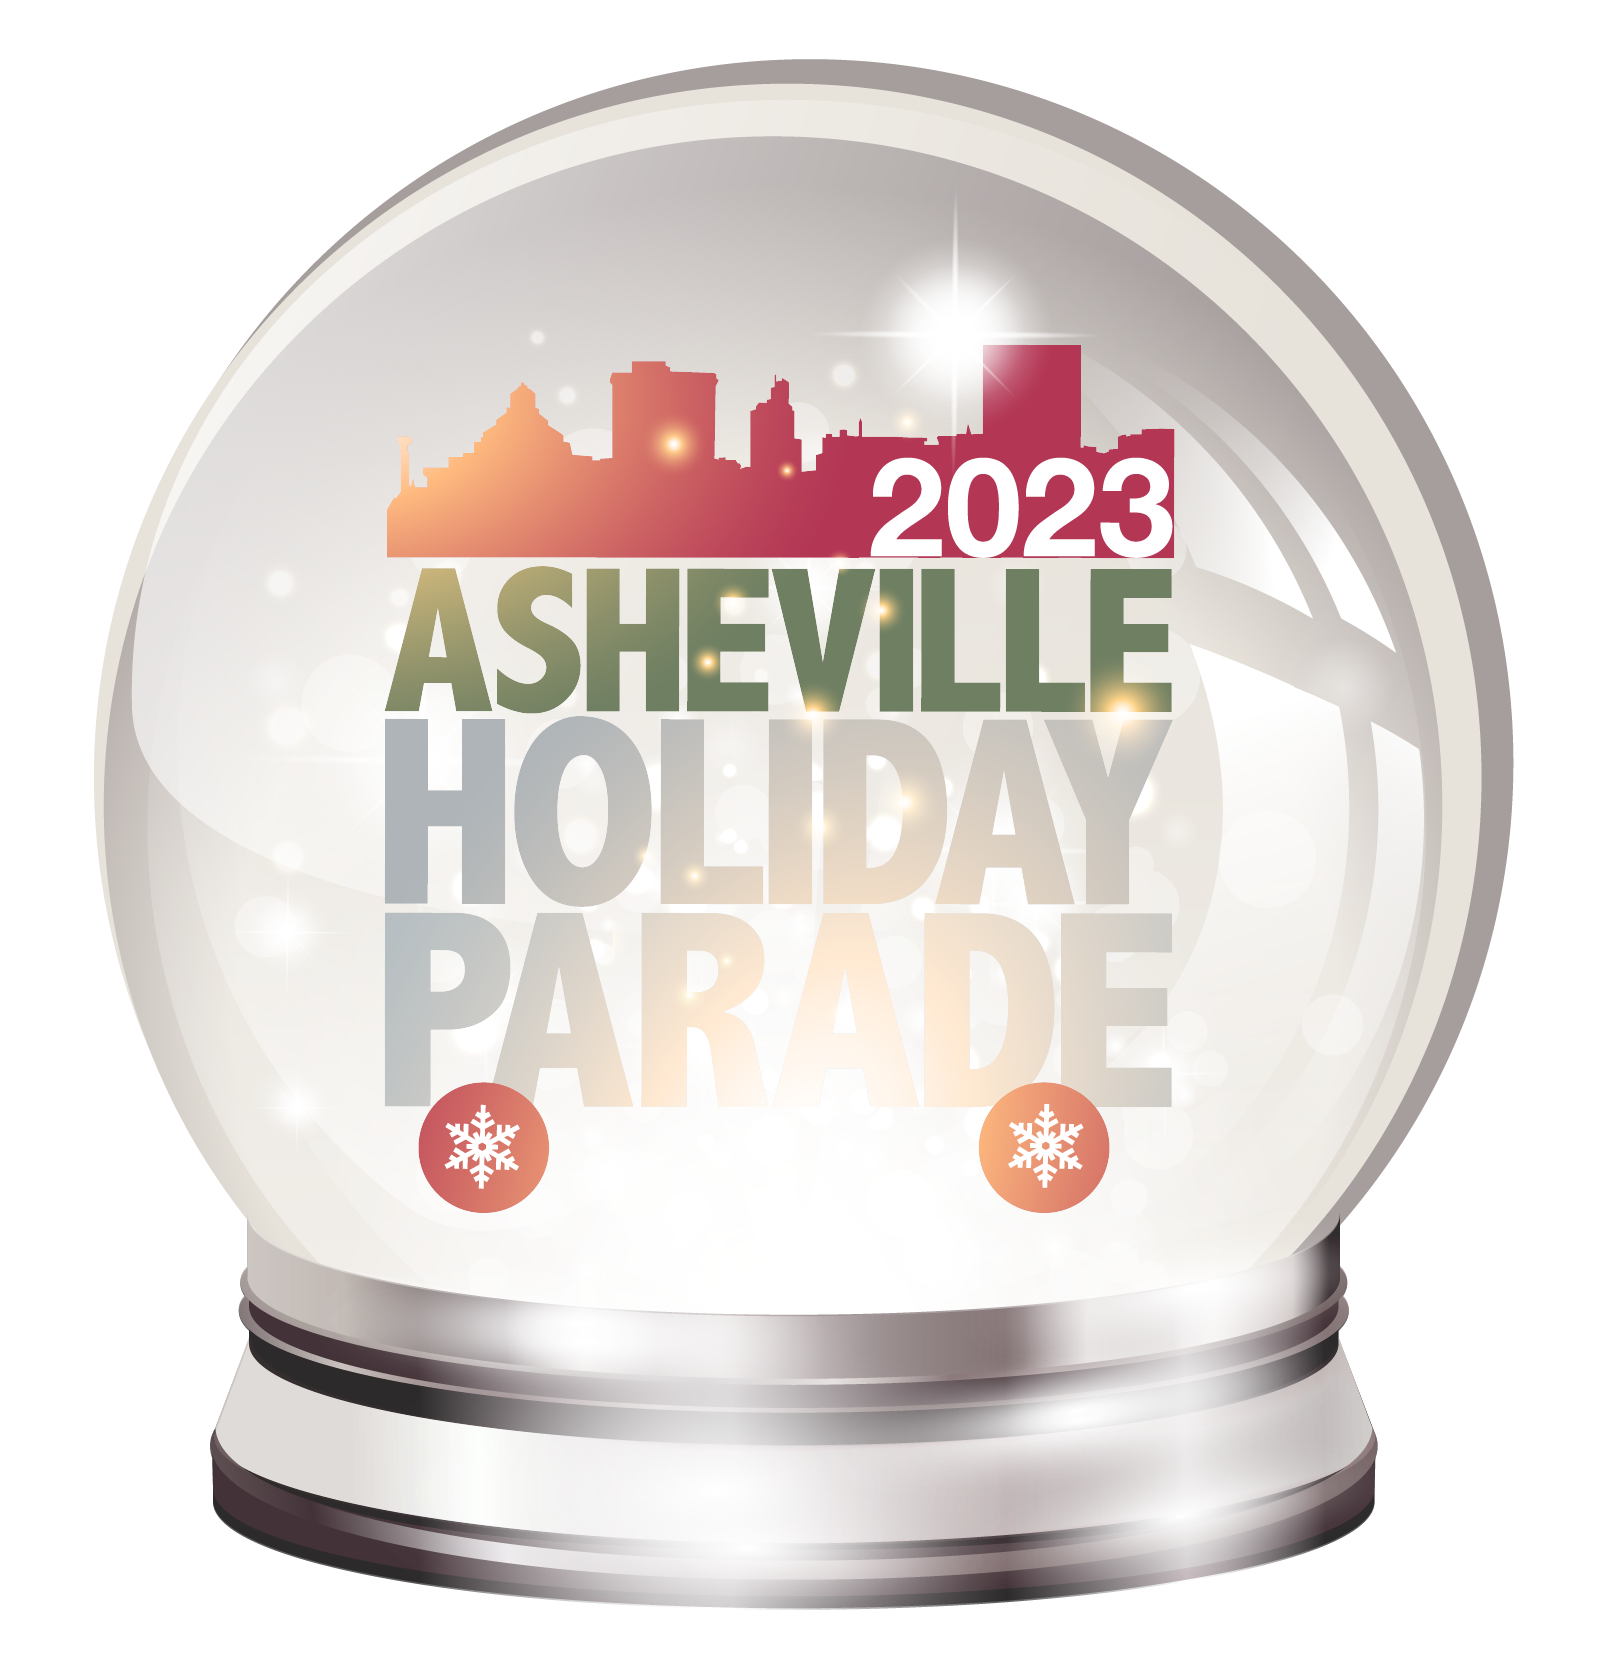 OPEN EARLY AT 10AM FOR THE ASHEVILLE HOLIDAY PARADE!